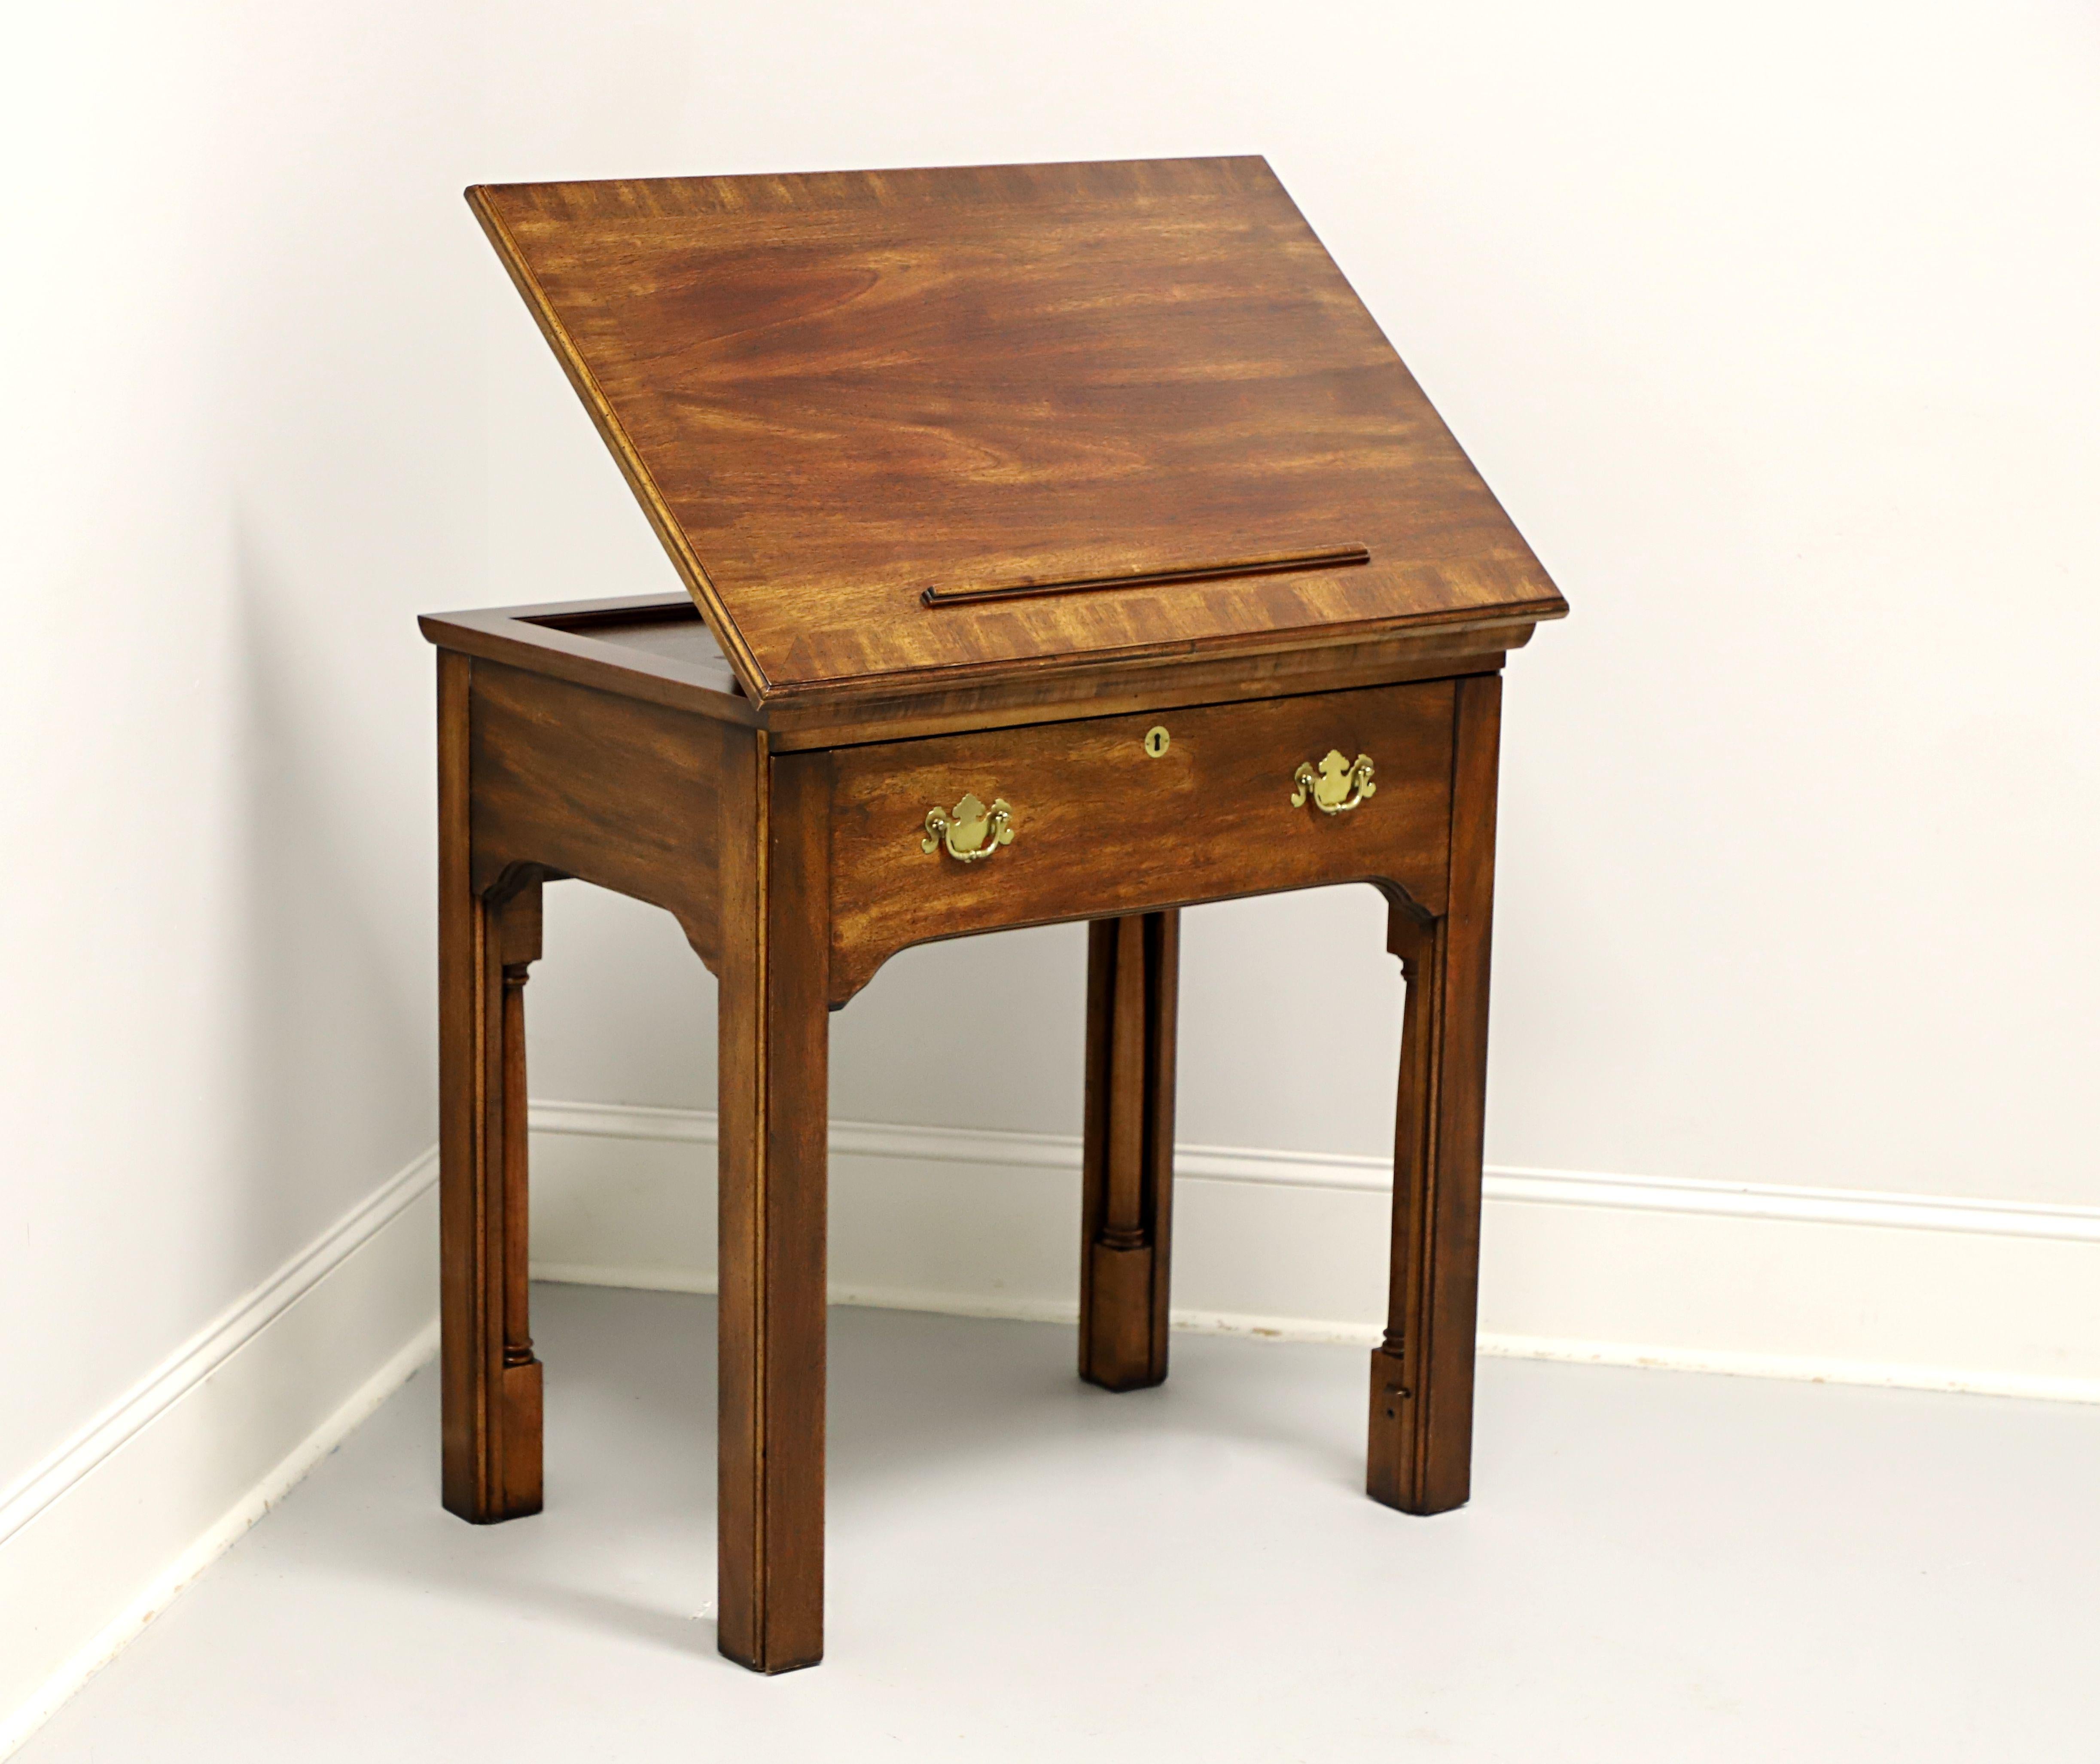 An adaptation of the Colonial period Thomas Jefferson Tall Adaptable Desk currently at Monticello, by National Mount Airy Furniture. Their version is similar, although shorter, to the original desk. Solid mahogany with brass hardware,  faux keyhole